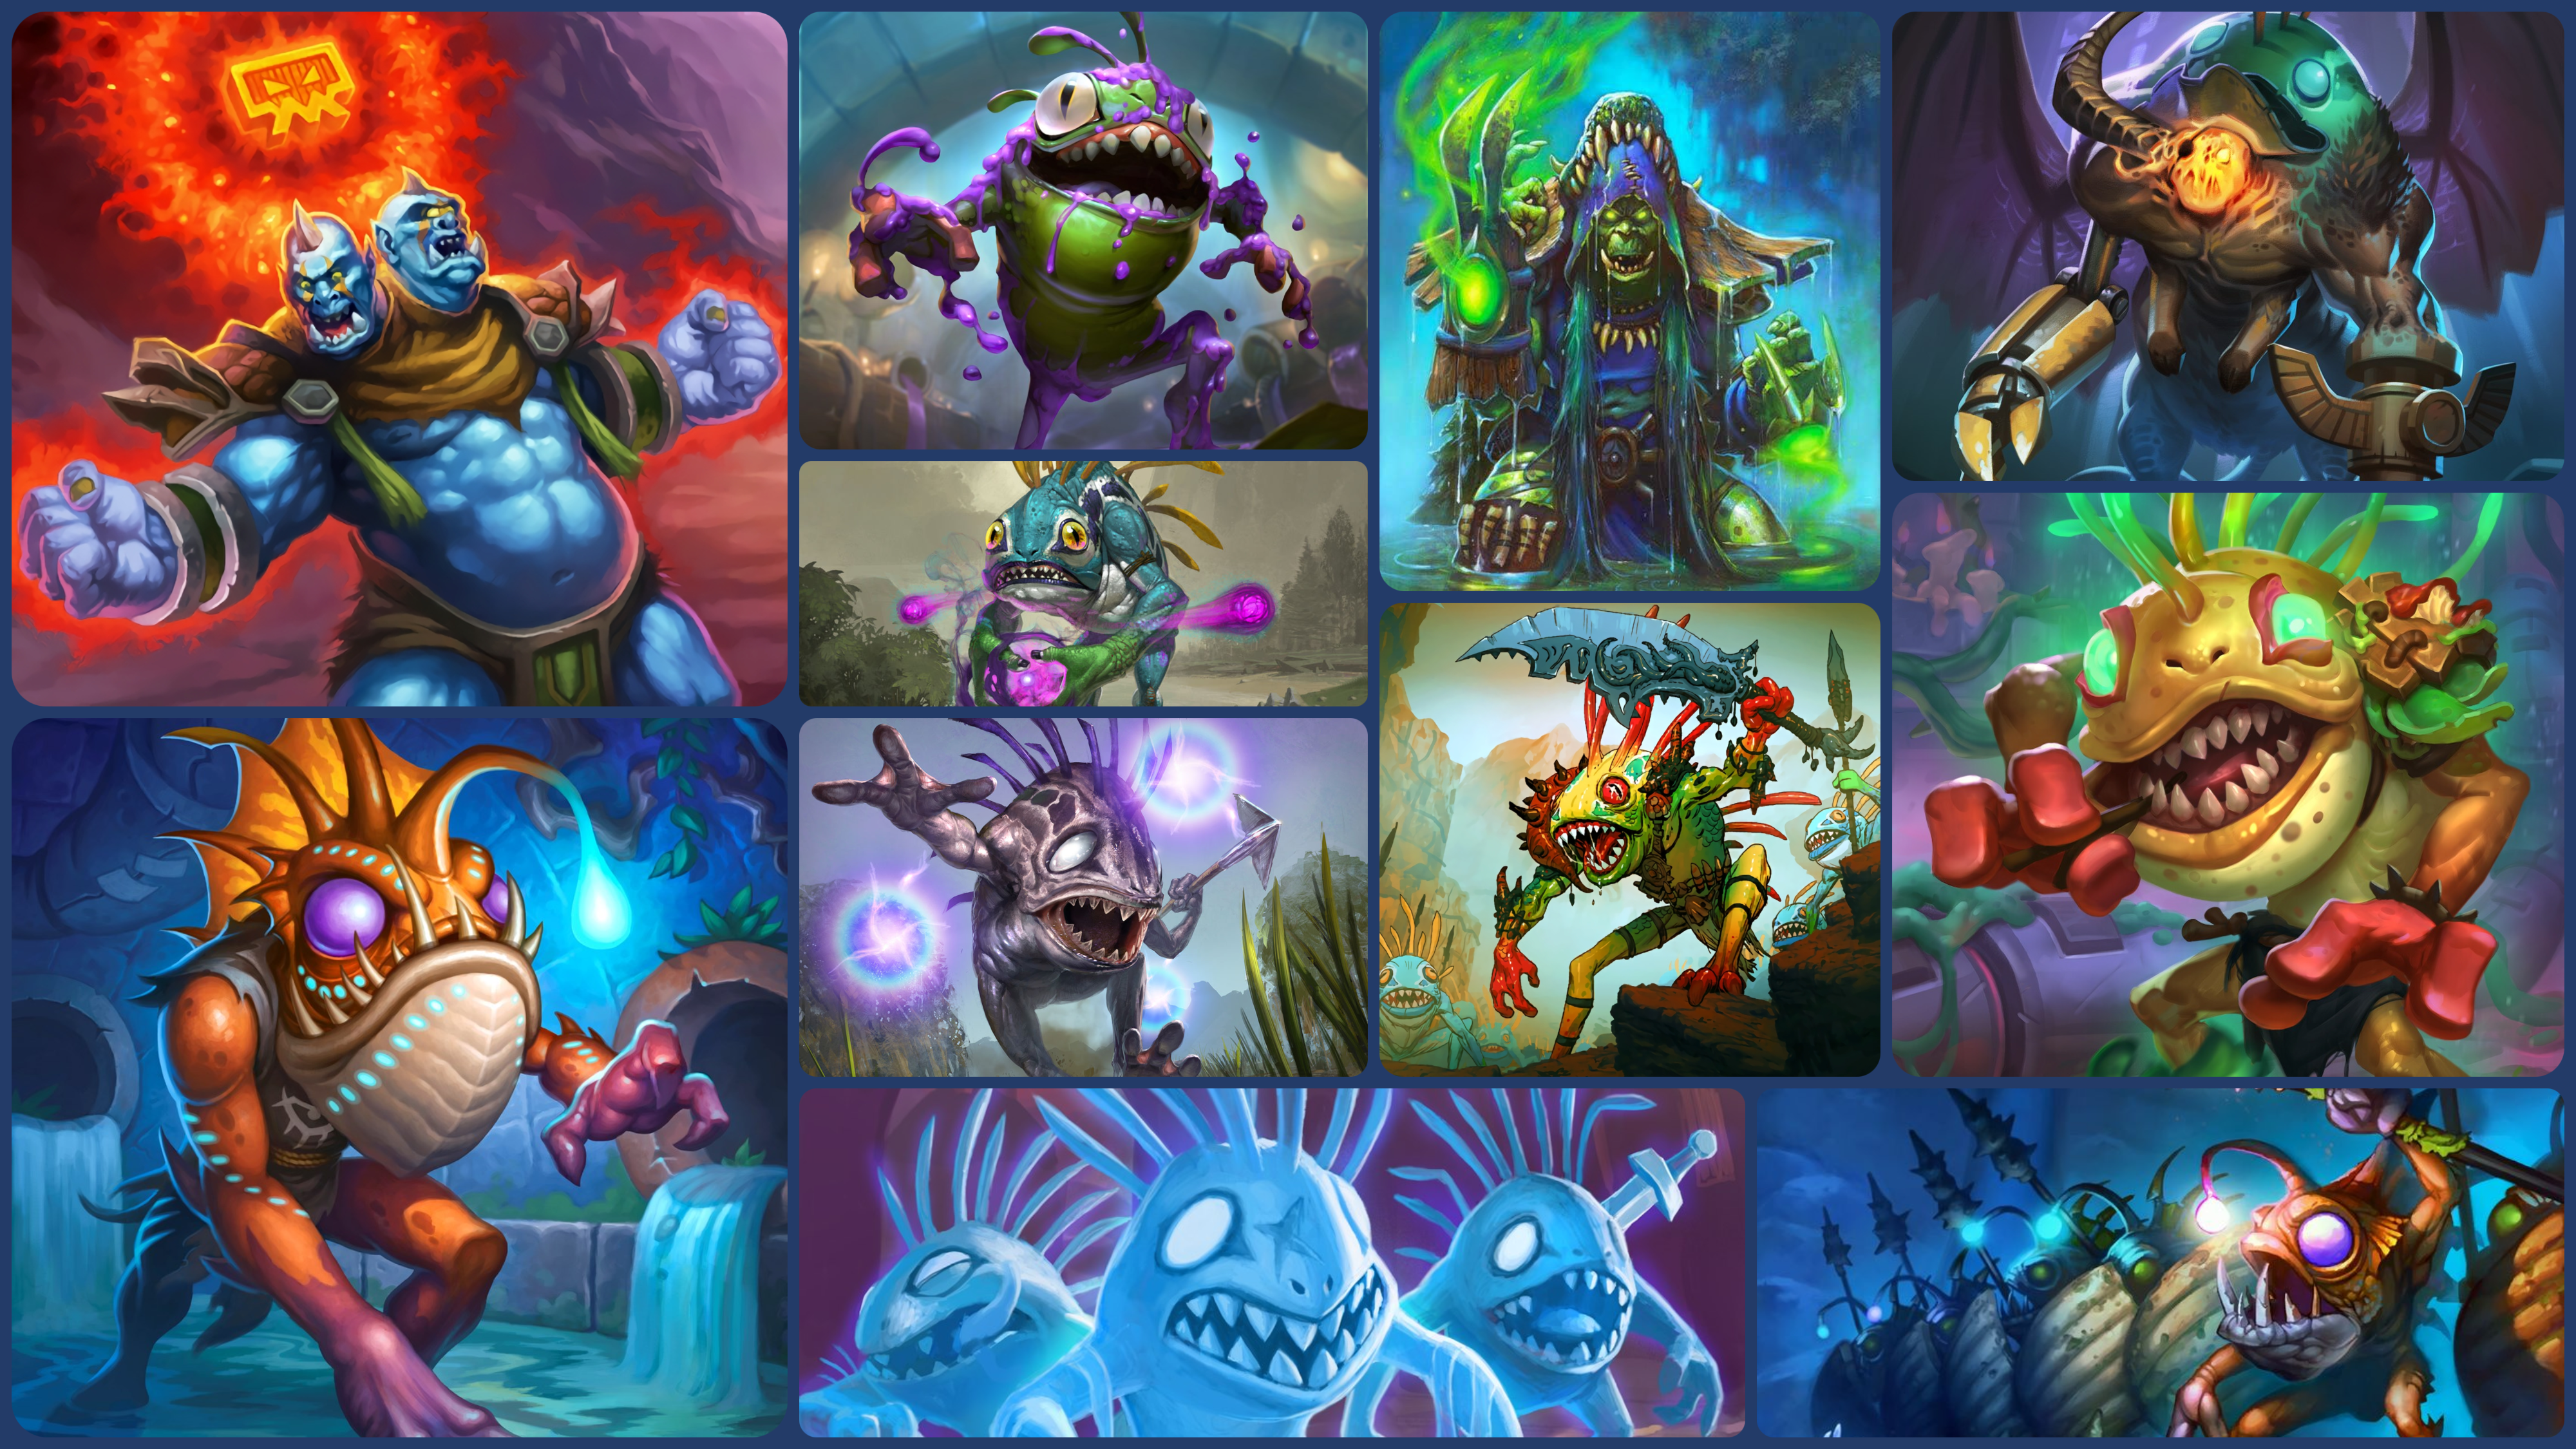 Free Download Murloc Shaman Wallpaper As Requested Hearthstone 4000x2250 For Your Desktop Mobile Tablet Explore 28 Hearthstone Wallpaper Hearthstone Rogue Wallpaper Wallpaper Illusions Hearthstone Multi Sale Hearthstone Heroes Of Warcraft